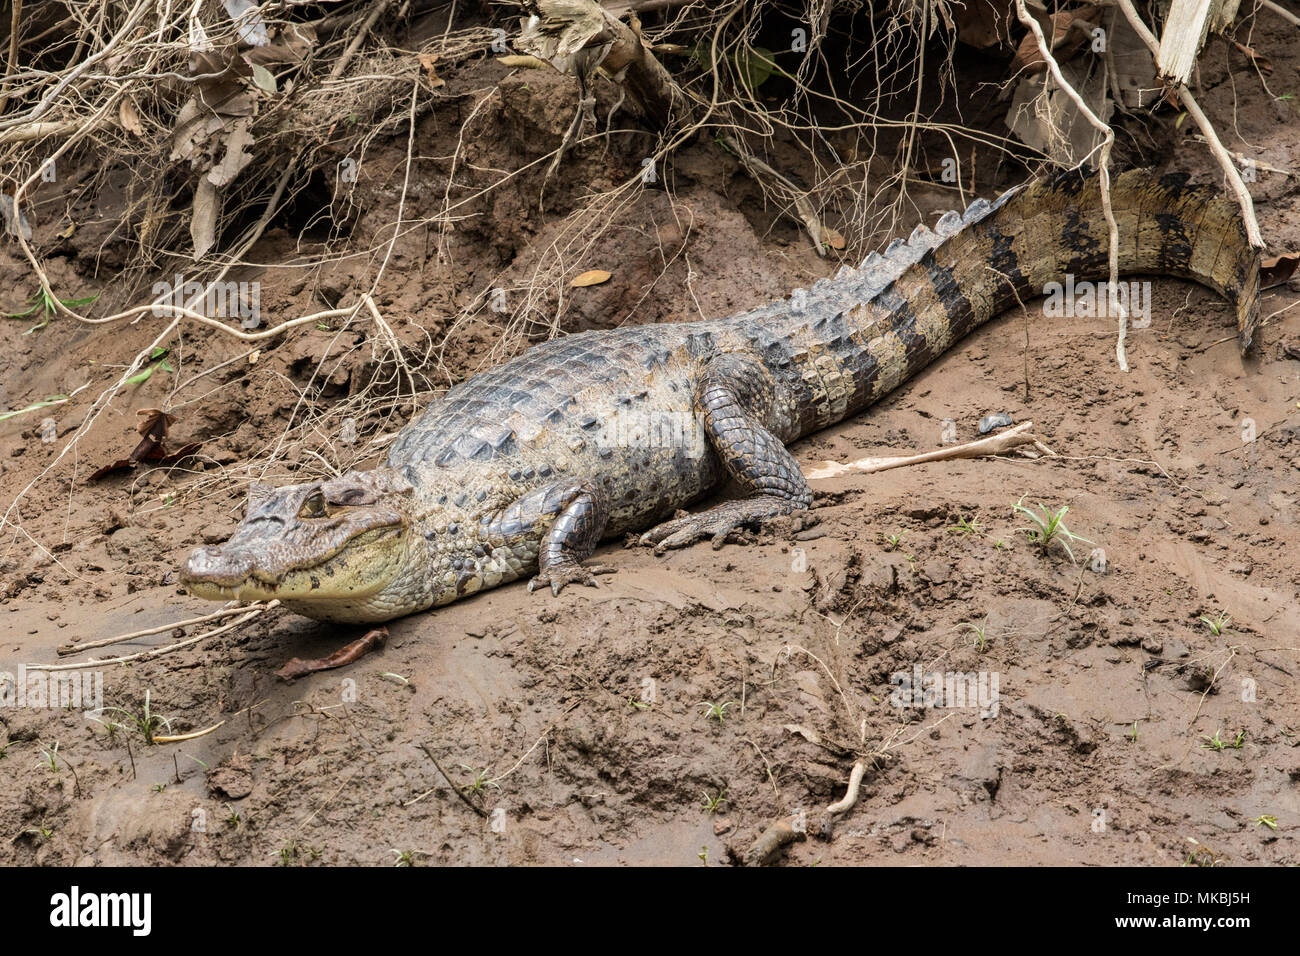 spectacled caiman Caiman crocodilus adult resting on mud on river bank, Costa Rica Stock Photo